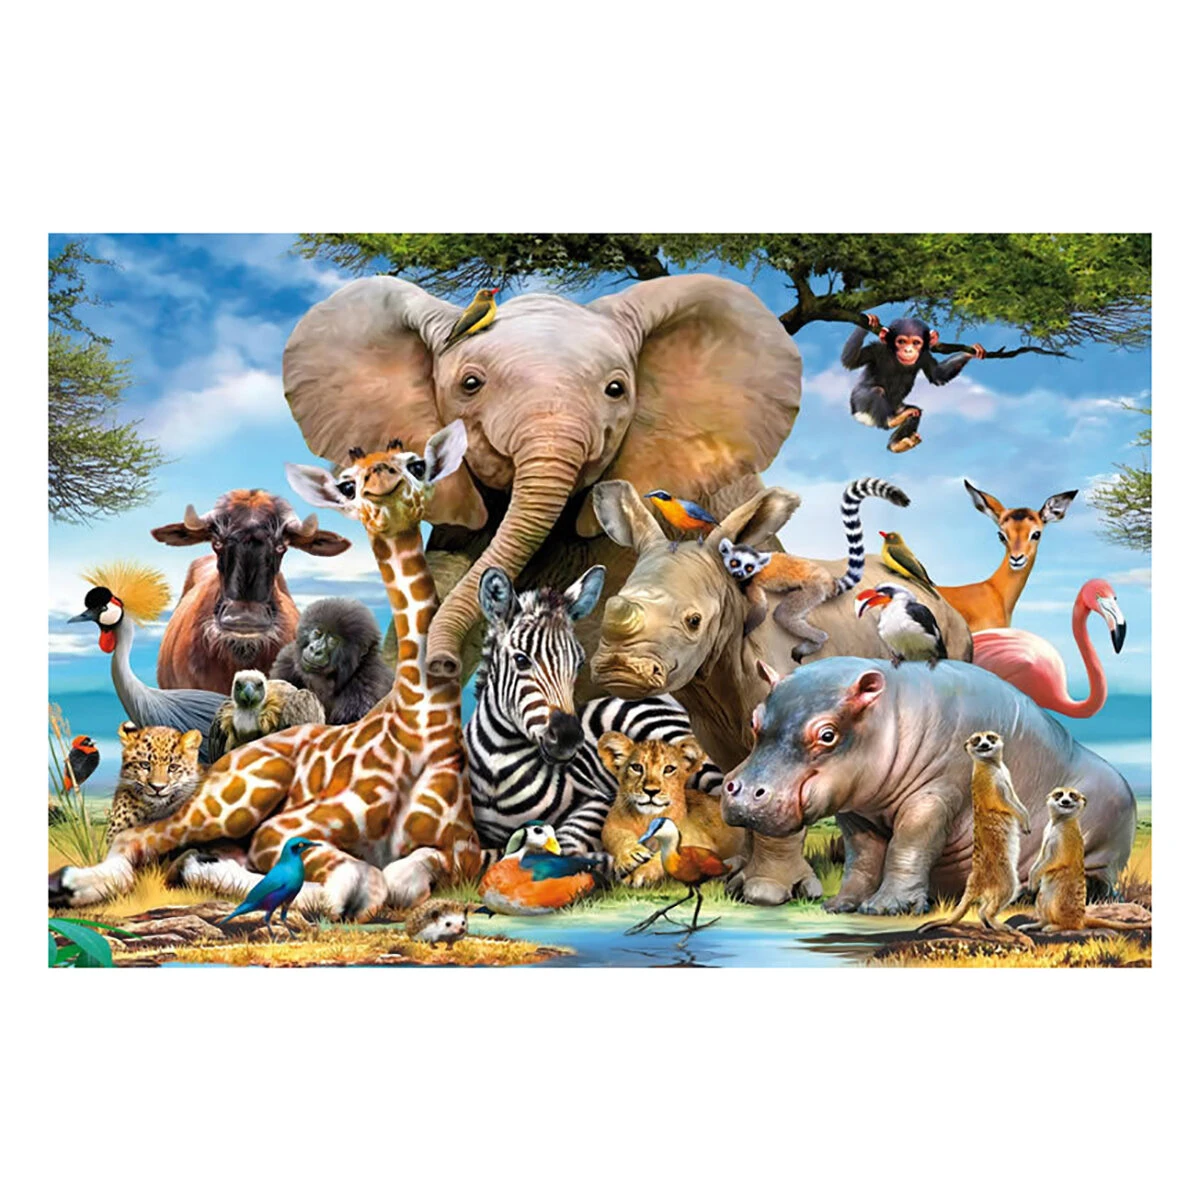 1000 pieces jigsaw puzzle toy animals plants decompression jigsaw puzzle for adults kids educational toys